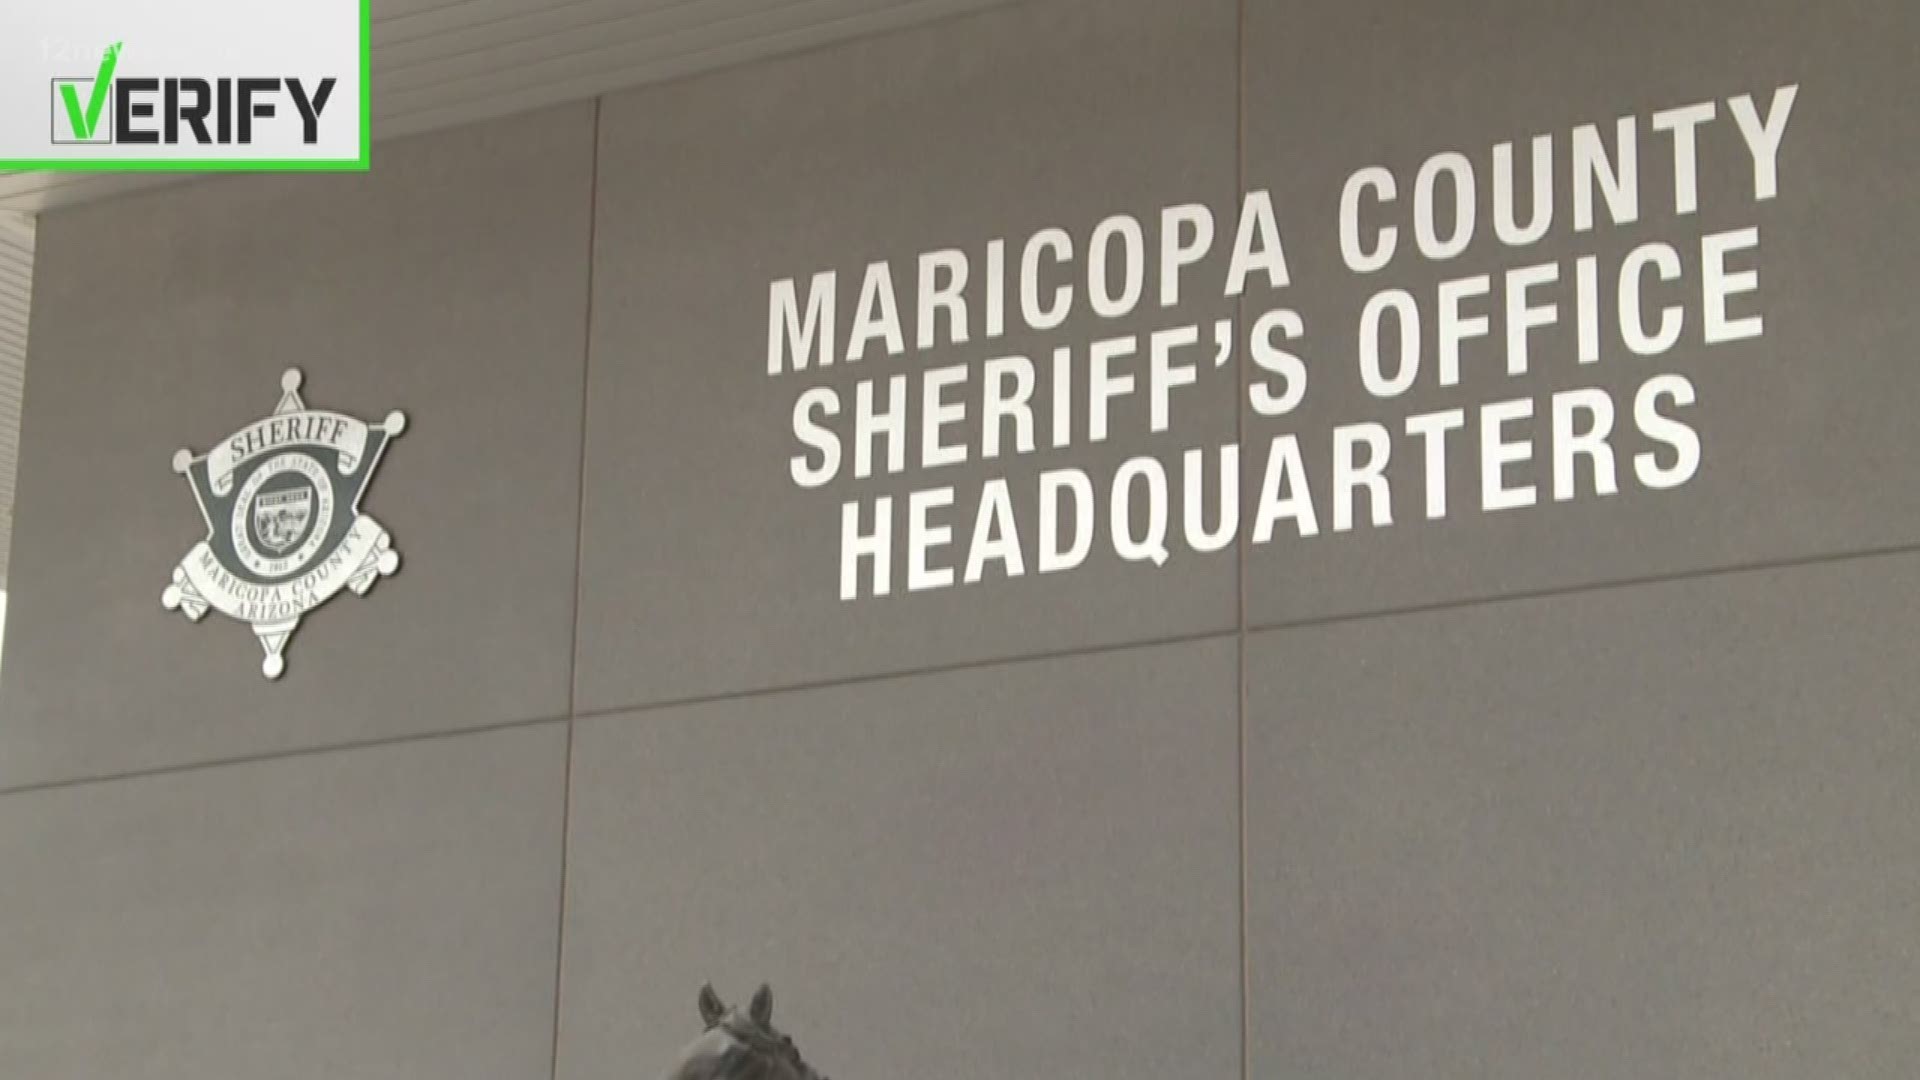 MCSO is continuing to implement reforms ordered by a judge since the racial profiling case under Joe Arpaio. This latest report is a reality check.